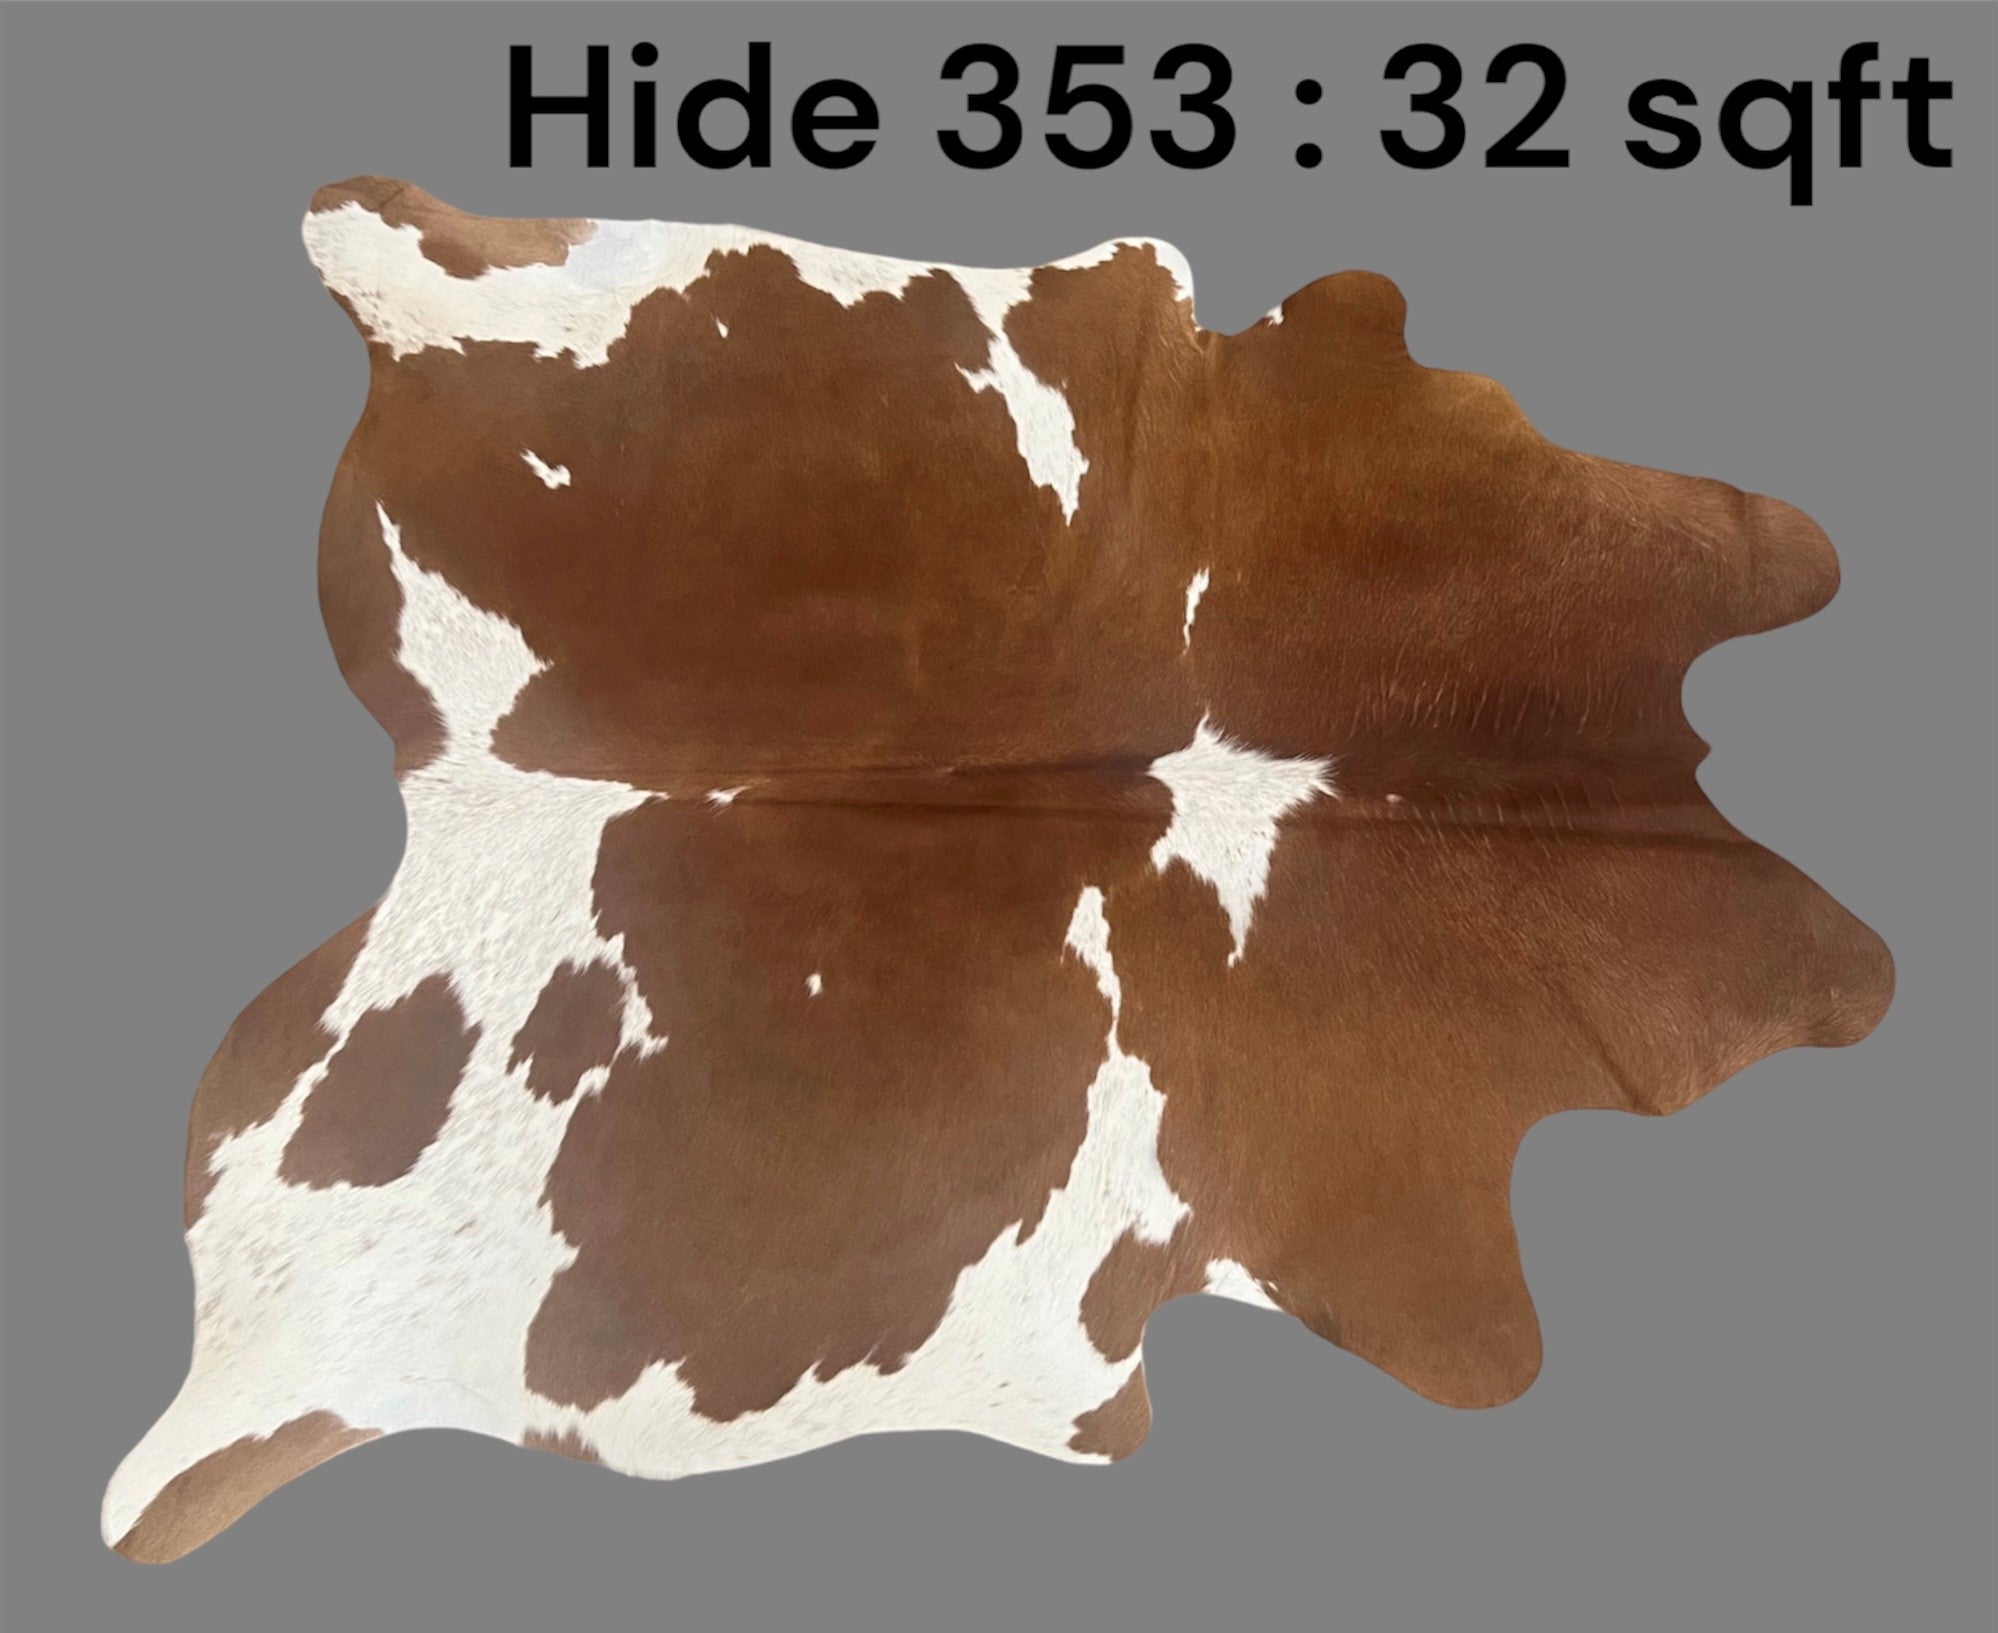 Natural Hair On Cow Hide : This Hide Is Perfect For Wall Hanging, Leather Rugs, Leather Upholstery & Leather Accessories. (Hide353)